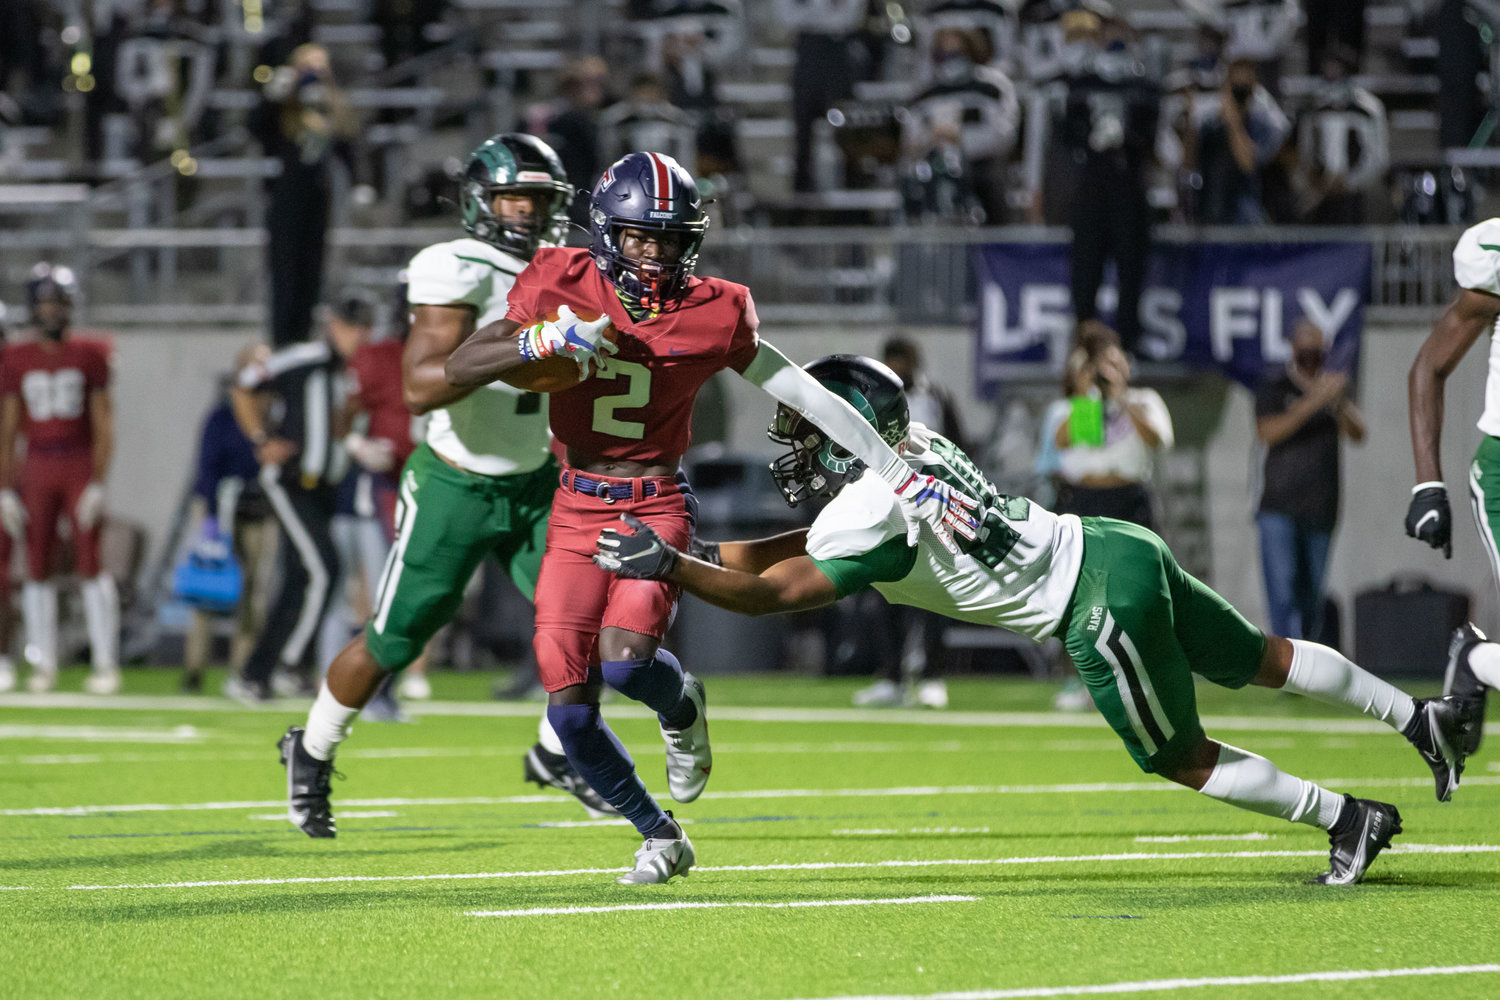 Tompkins junior receiver Joshua McMillan II verbally committed to HBU on April 23. McMillan had 522 yards and eight touchdowns for the Falcons last season.